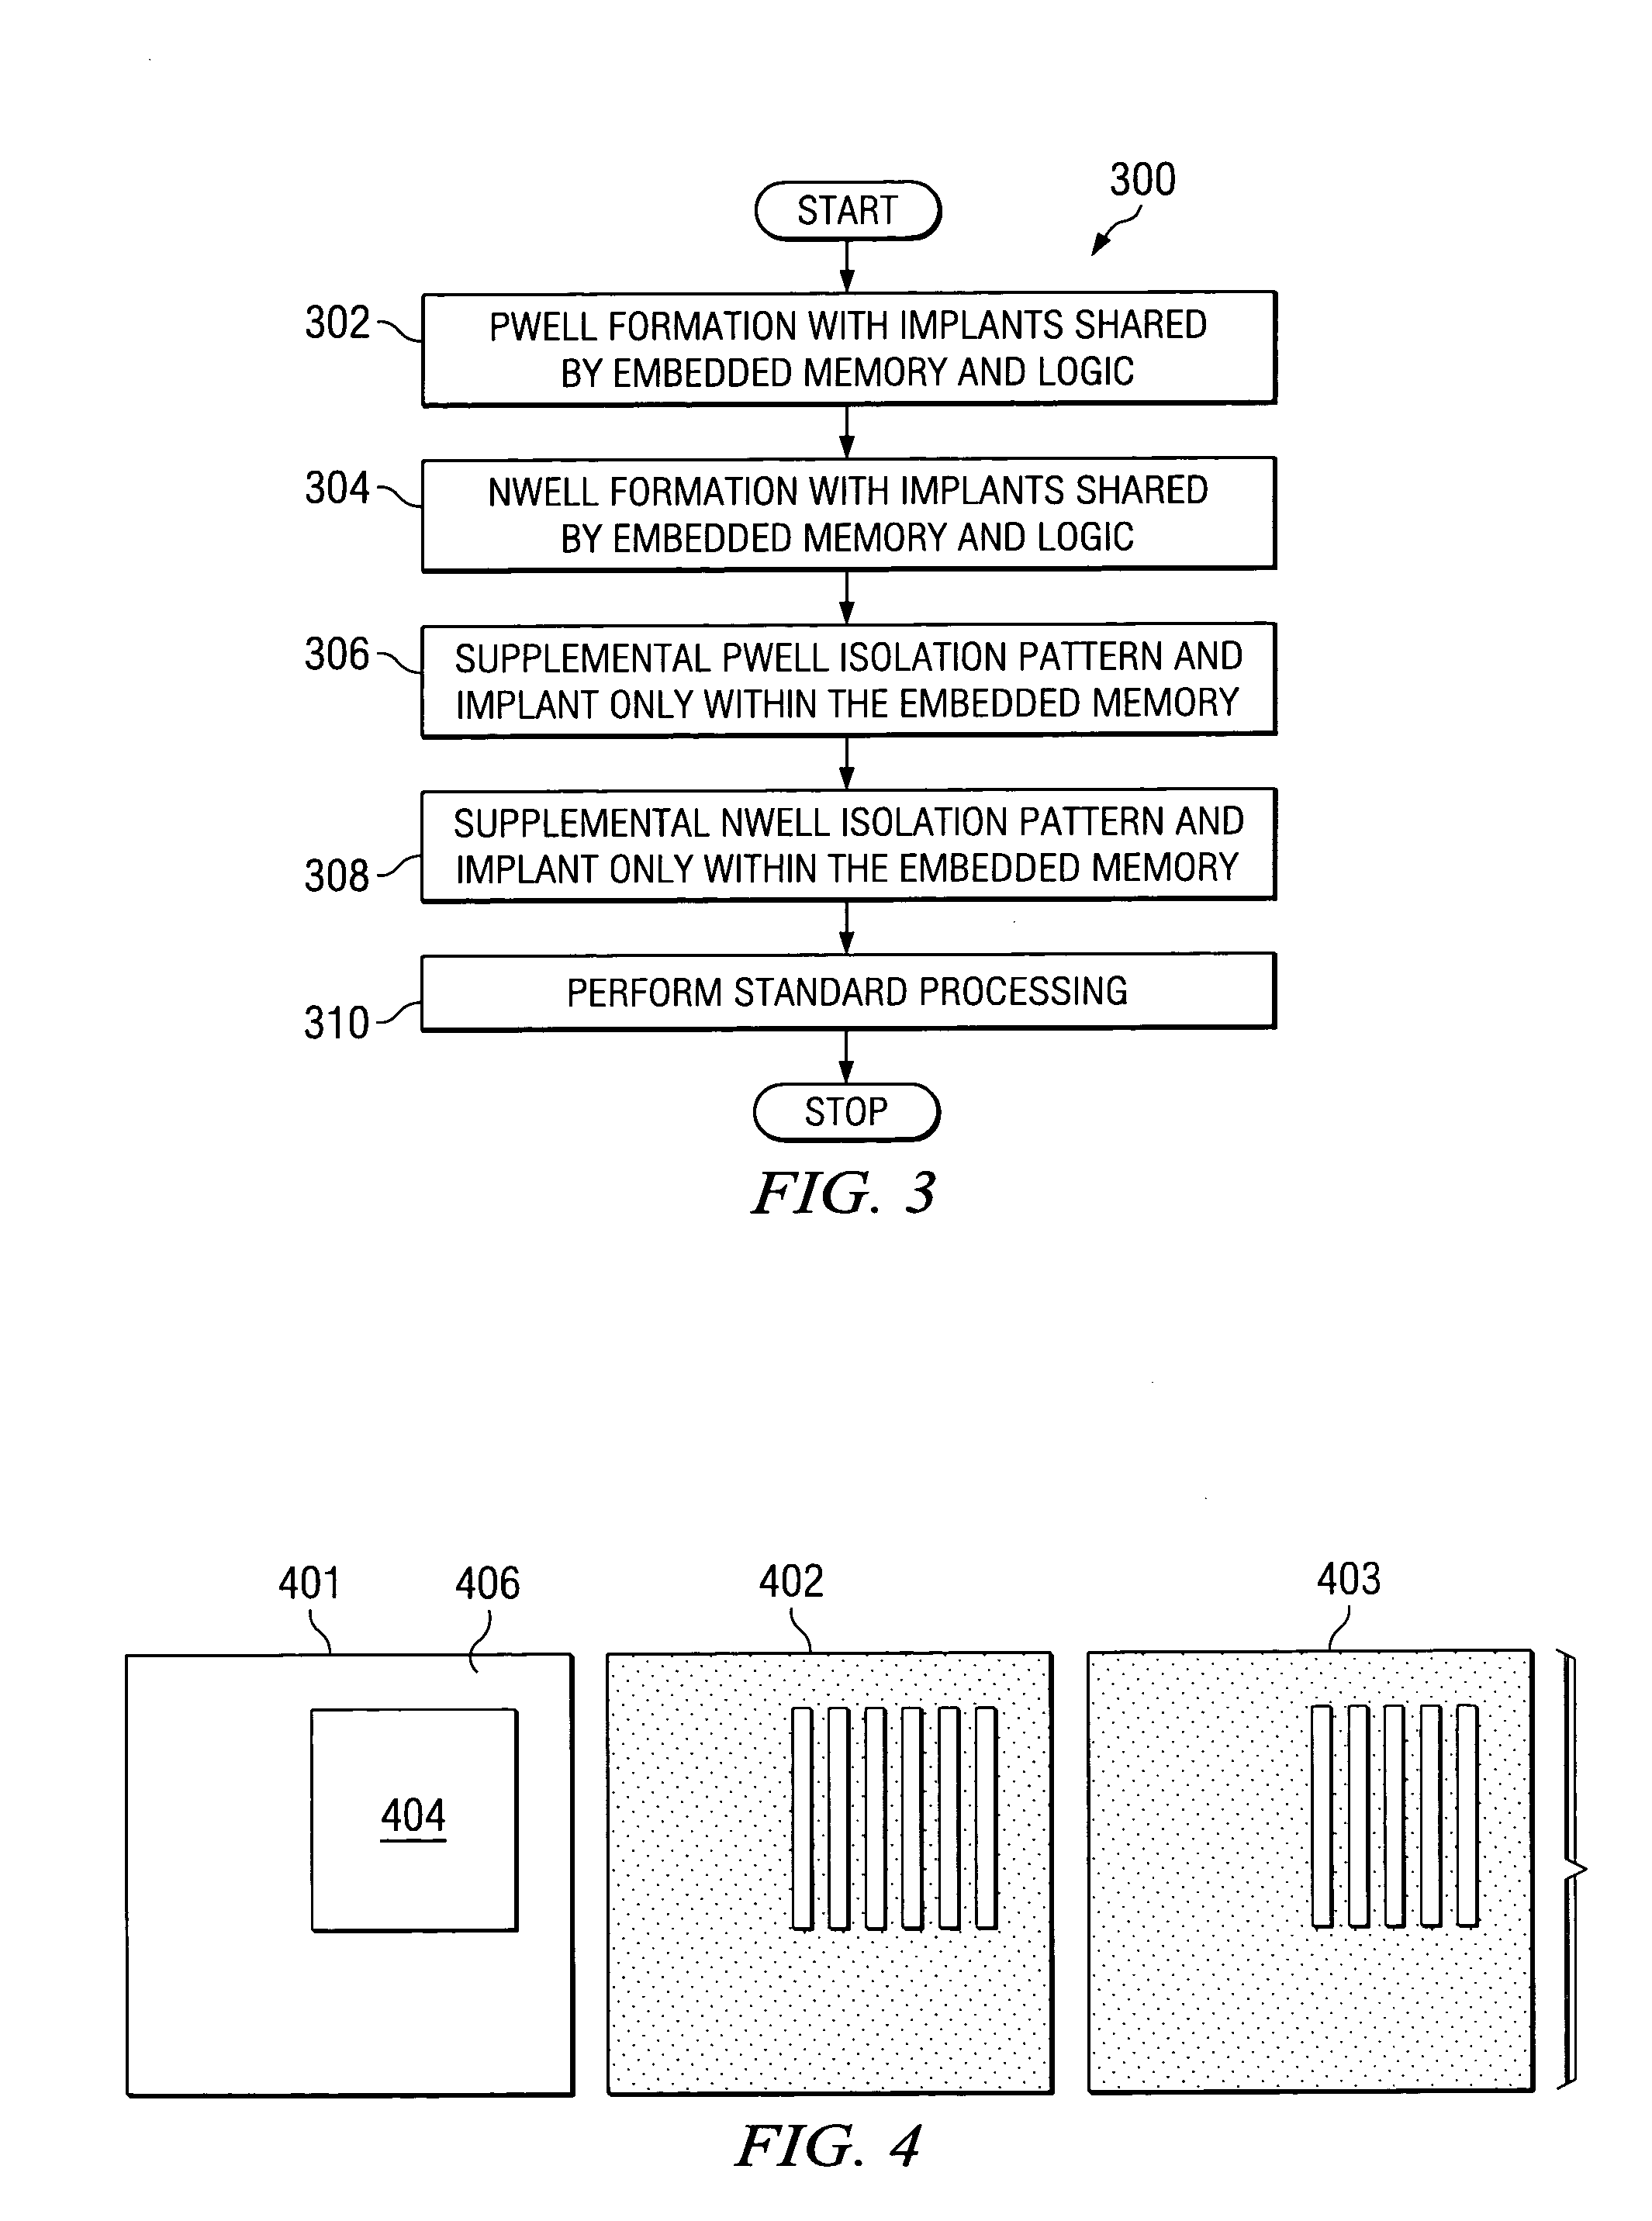 Application of different isolation schemes for logic and embedded memory